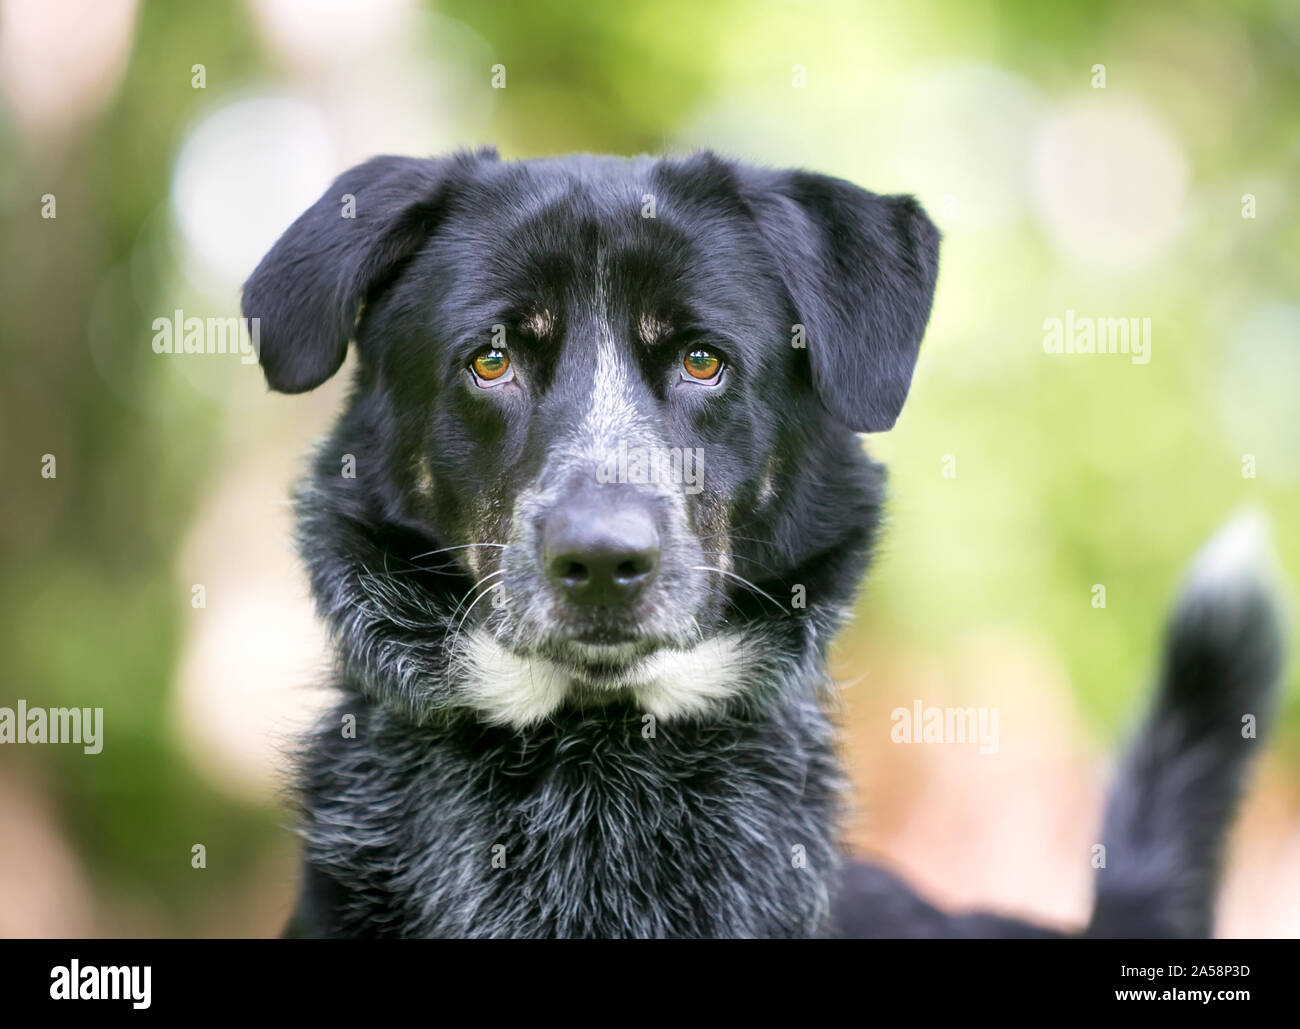 A Border Collie / Australian Cattle Dog mixed breed dog outdoors looking directly at the camera Stock Photo